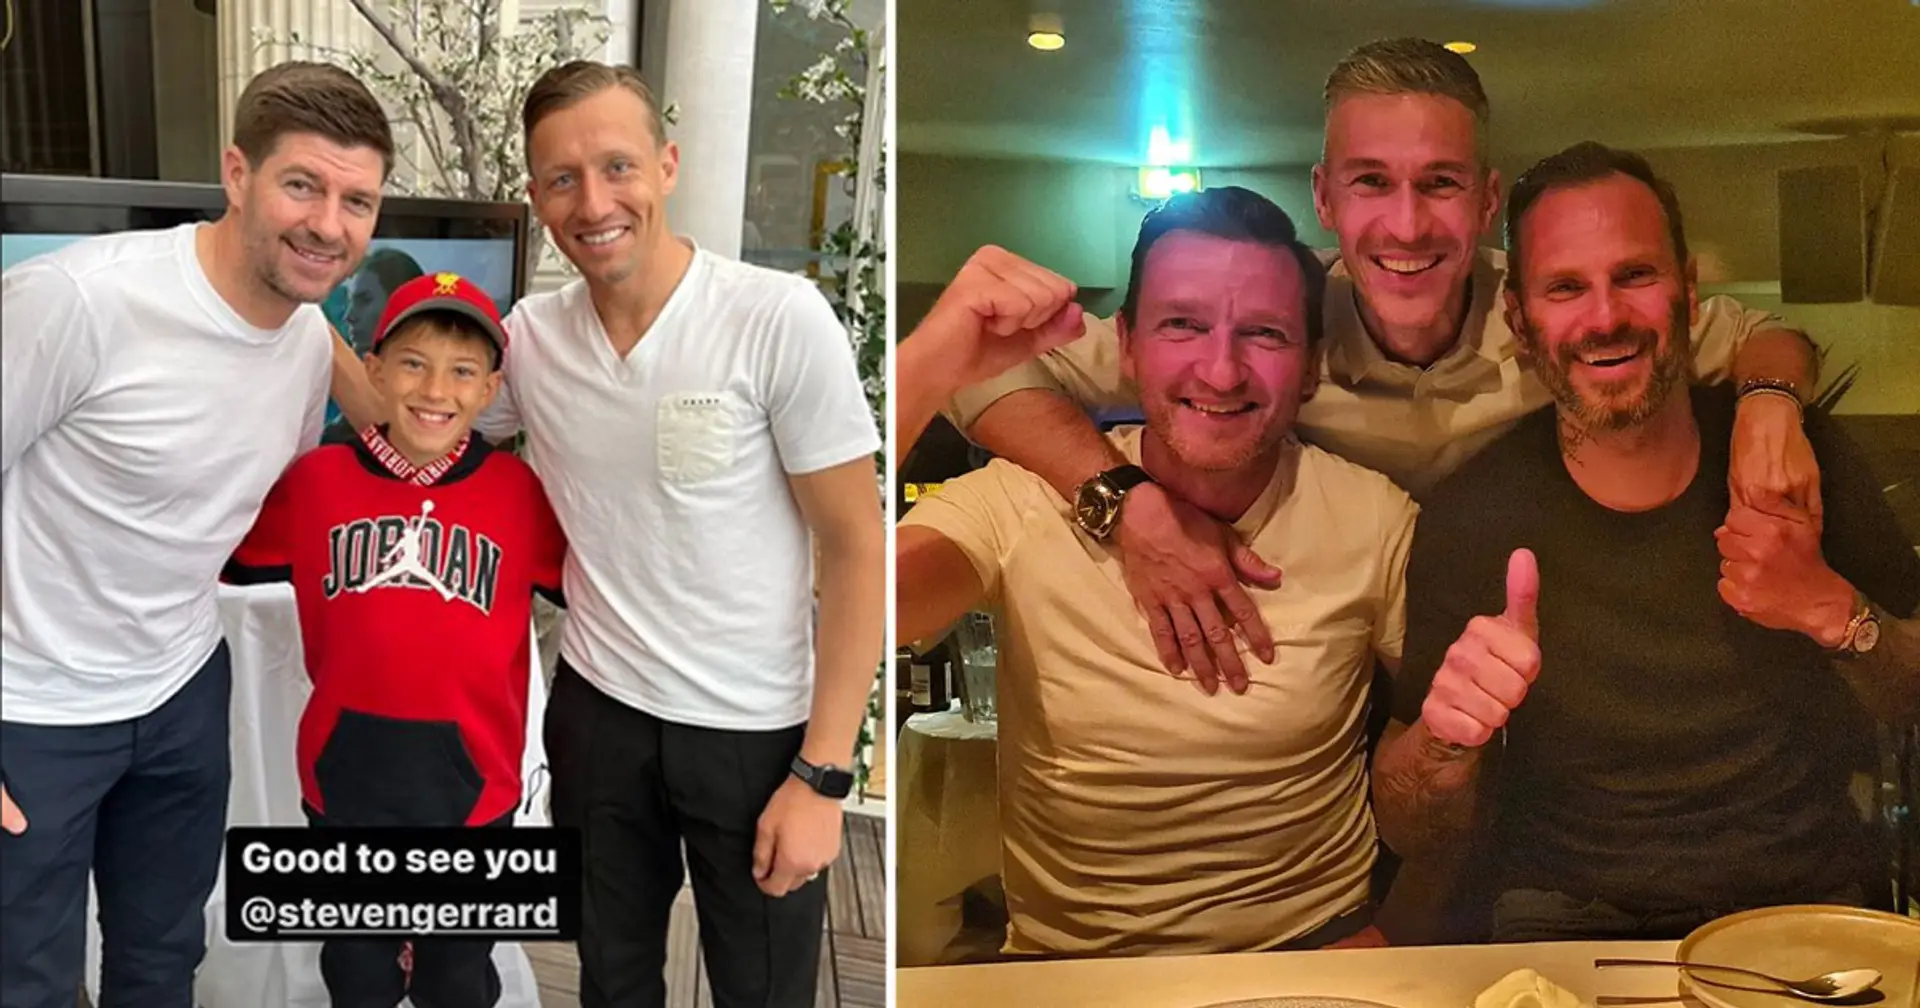 Gerrard, Lucas Leiva and 5 more ex-Reds spotted in Paris ahead of UCL final